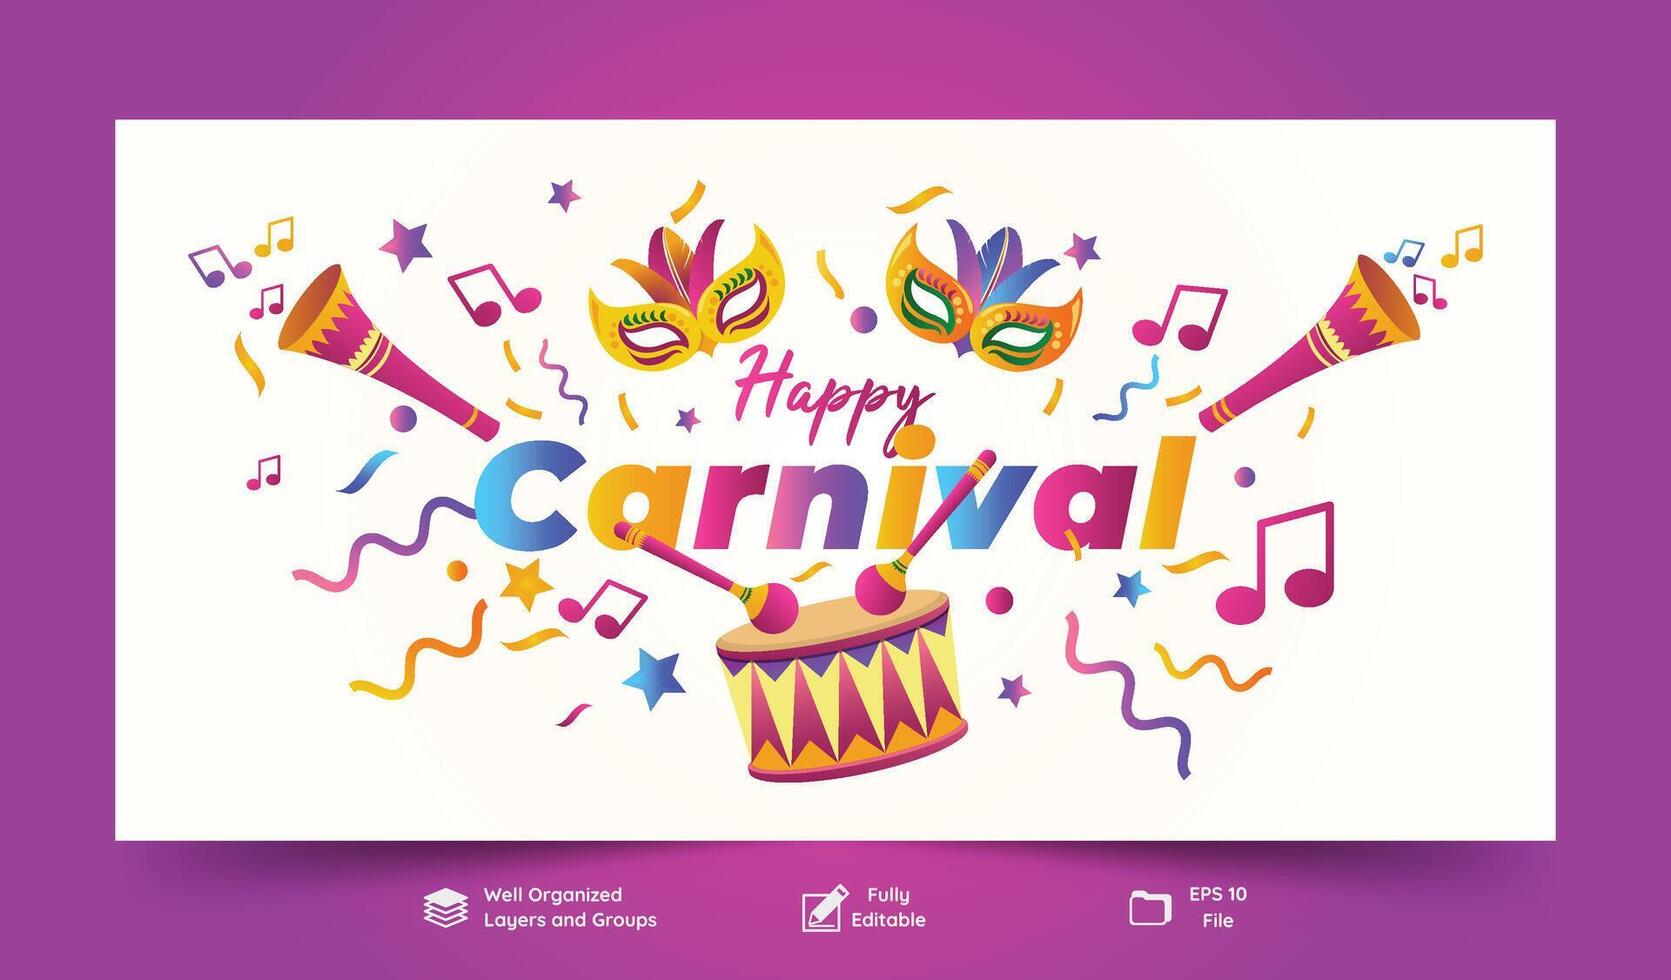 Happy Carnival Festive Concept with Drum Tambourine Masks and Ribbons Isolated on White Background vector